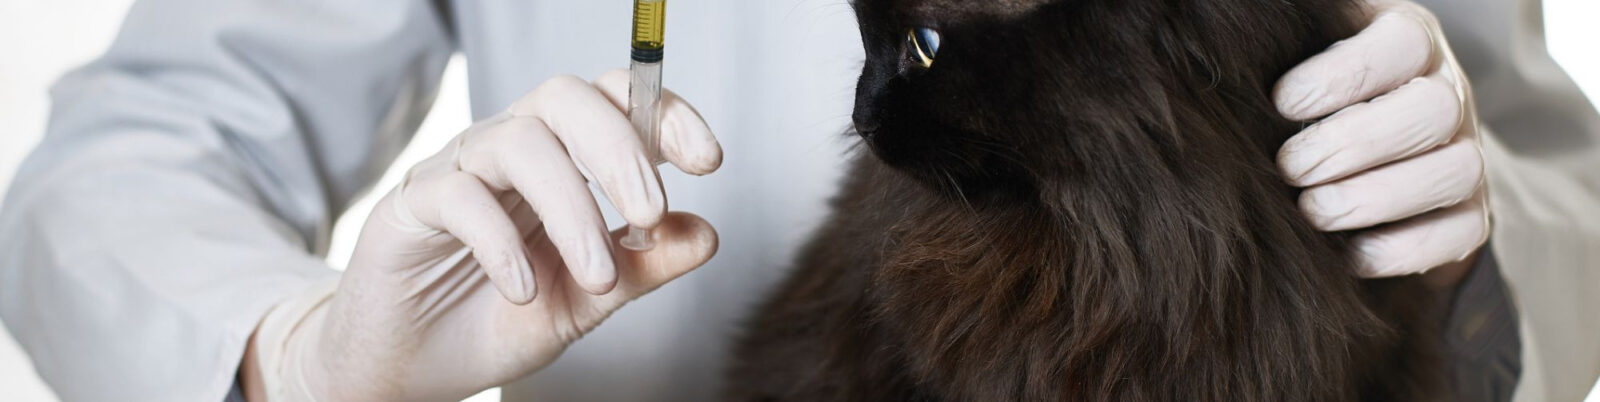 Cat Vaccinations What Shots Does My Cat Need? Keeping It Pawsome